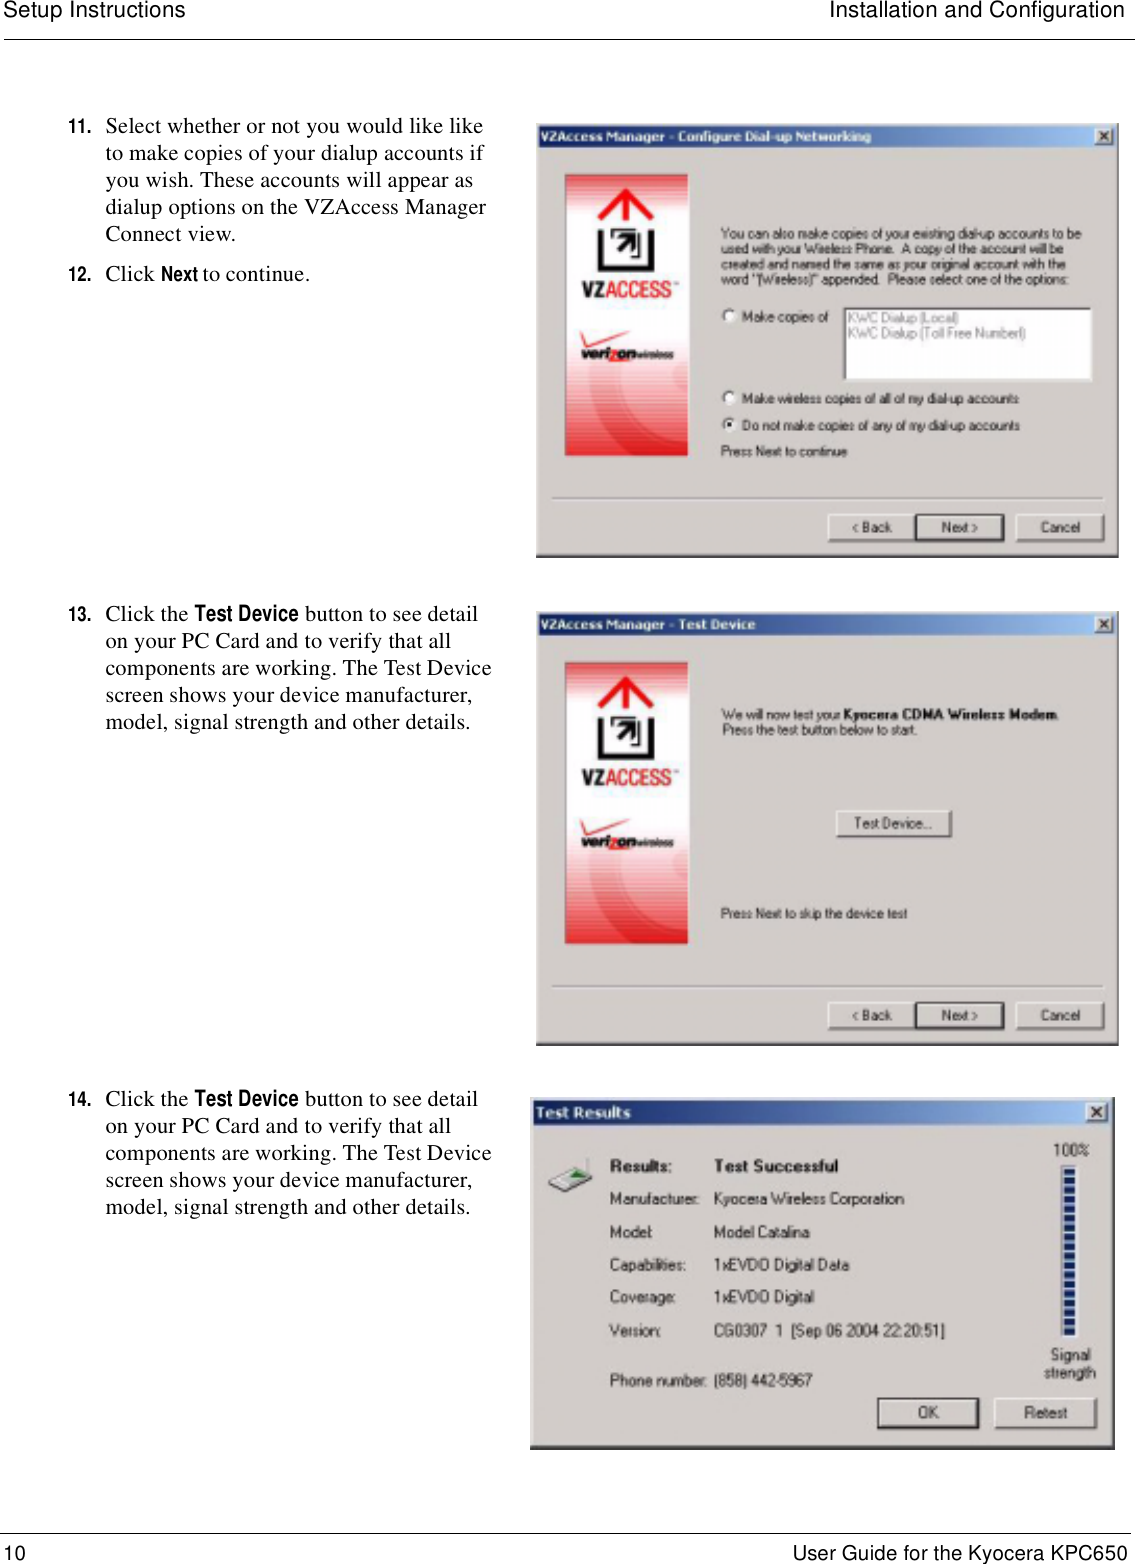 Setup Instructions Installation and Configuration10  User Guide for the Kyocera KPC65011. Select whether or not you would like like to make copies of your dialup accounts if you wish. These accounts will appear as dialup options on the VZAccess Manager Connect view.12. Click Next to continue.13. Click the Test Device button to see detail on your PC Card and to verify that all components are working. The Test Device screen shows your device manufacturer, model, signal strength and other details.14. Click the Test Device button to see detail on your PC Card and to verify that all components are working. The Test Device screen shows your device manufacturer, model, signal strength and other details.